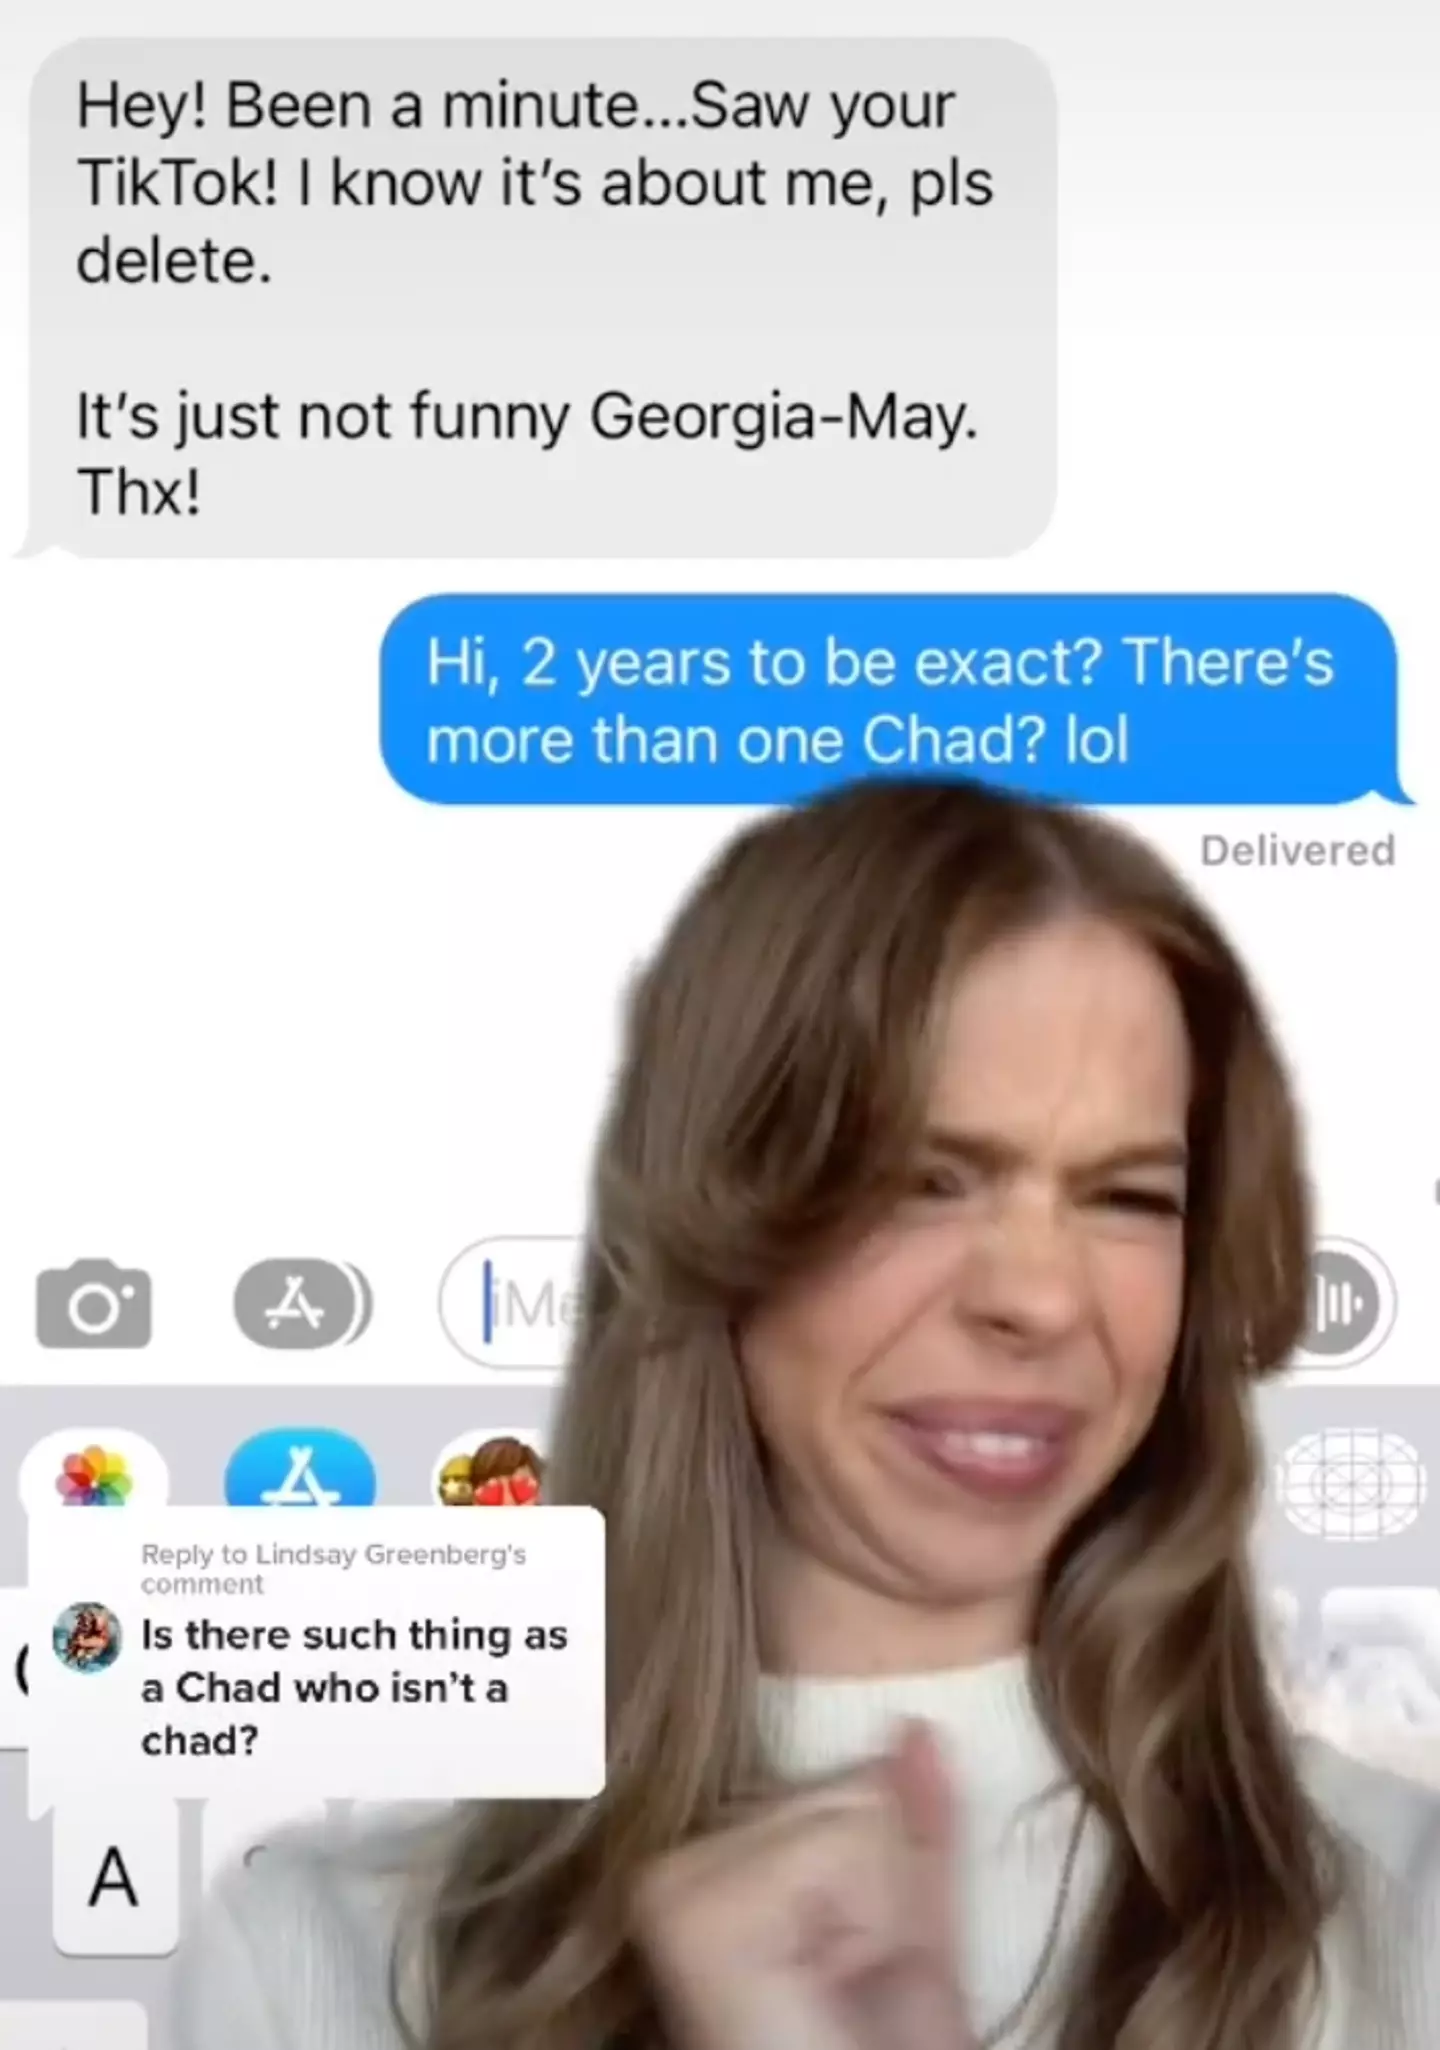 Ex Chad also didn't get the message.